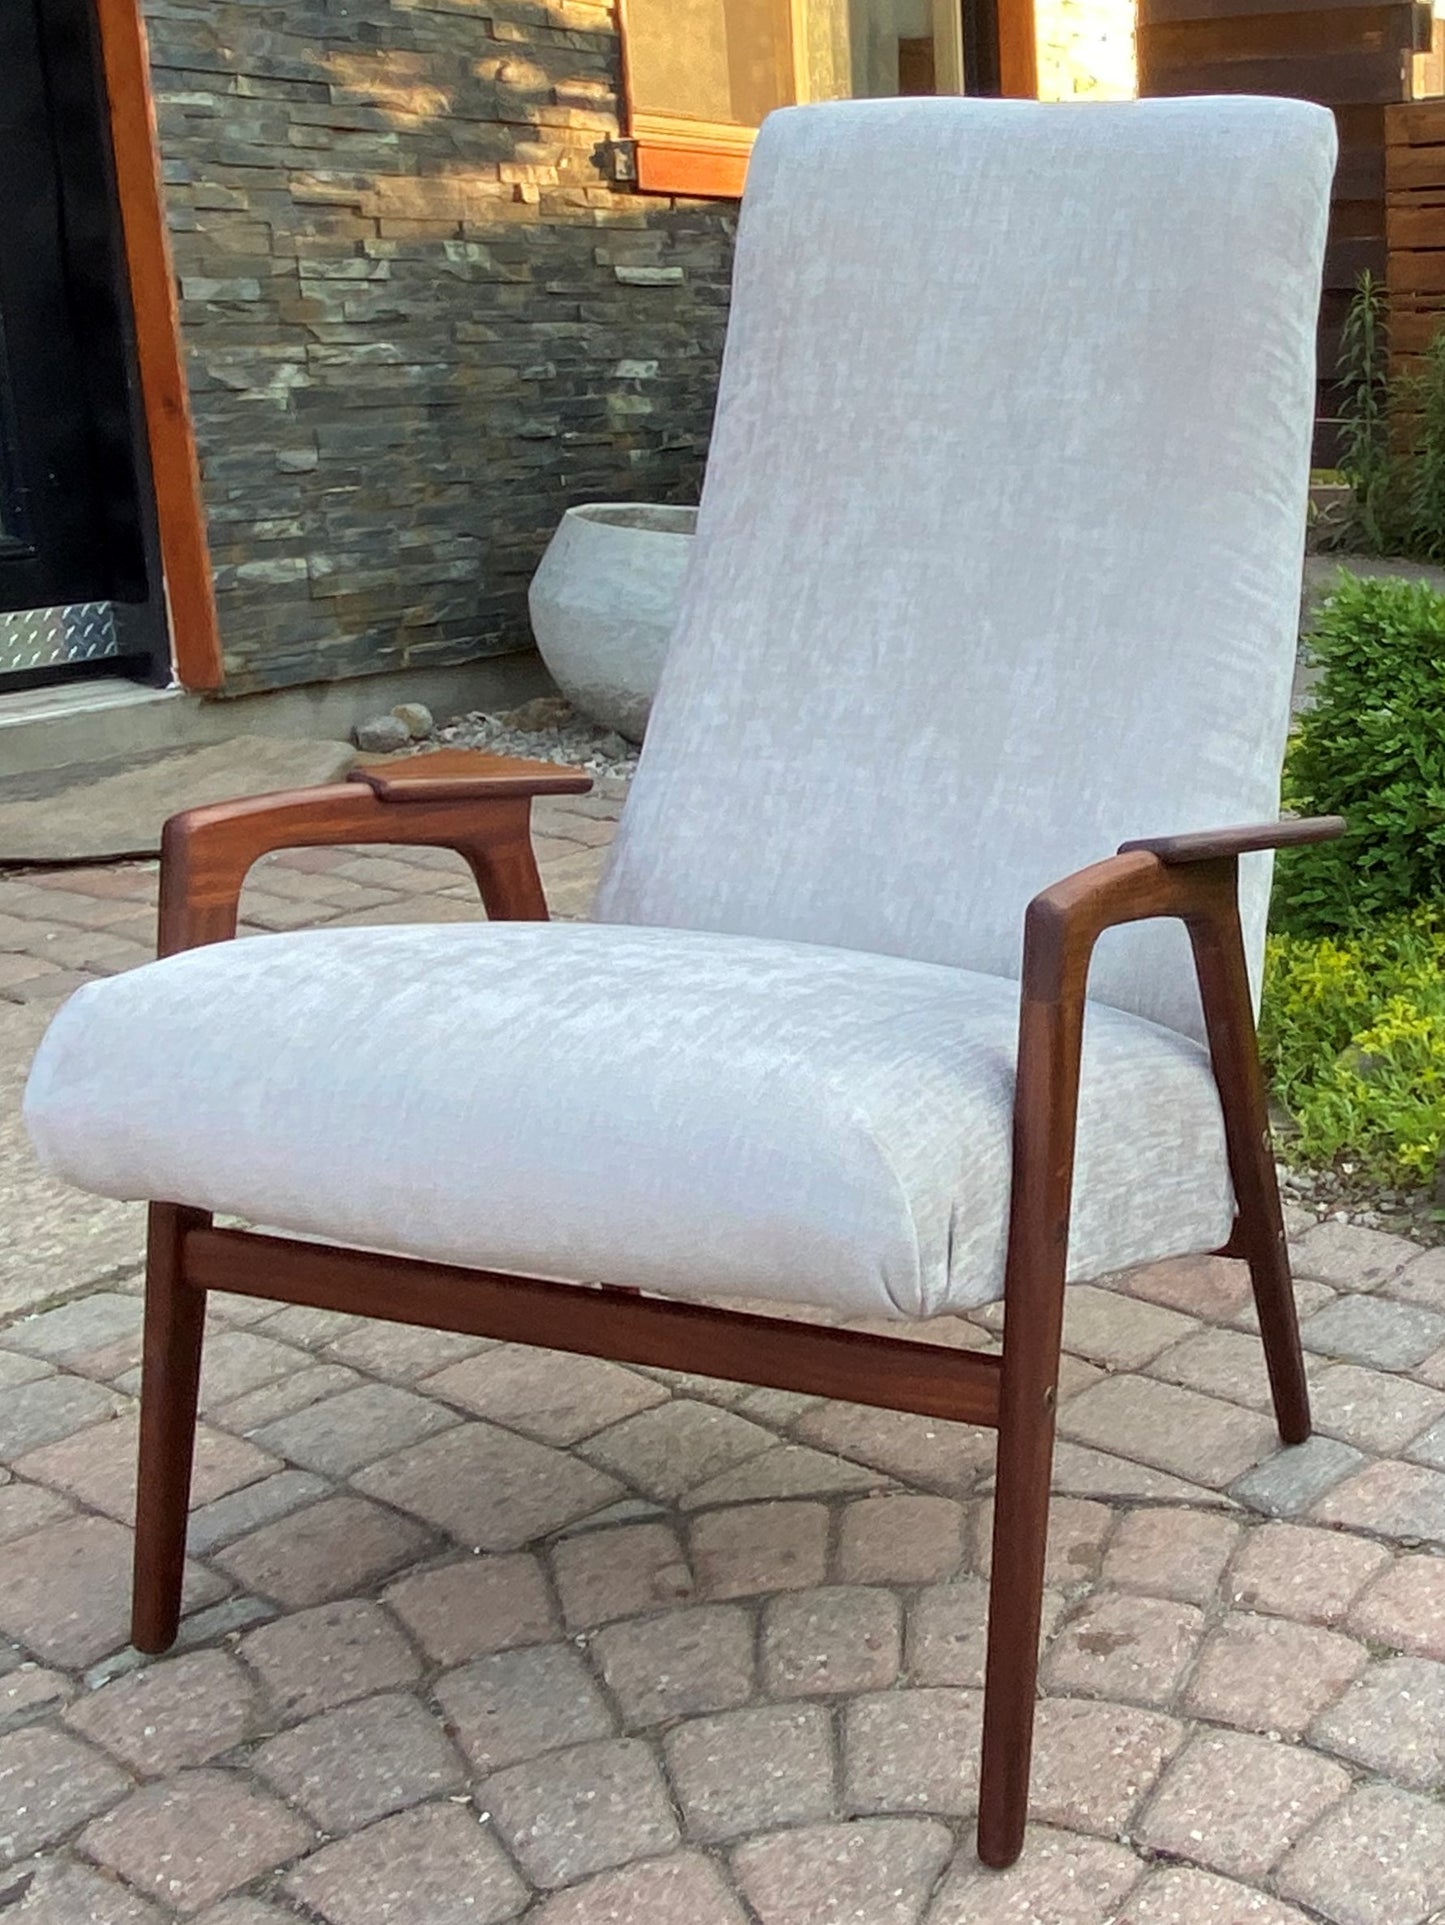 REFINISHED Danish Mid Century Modern Teak Lounge Chair NEW Upholstery, Perfect